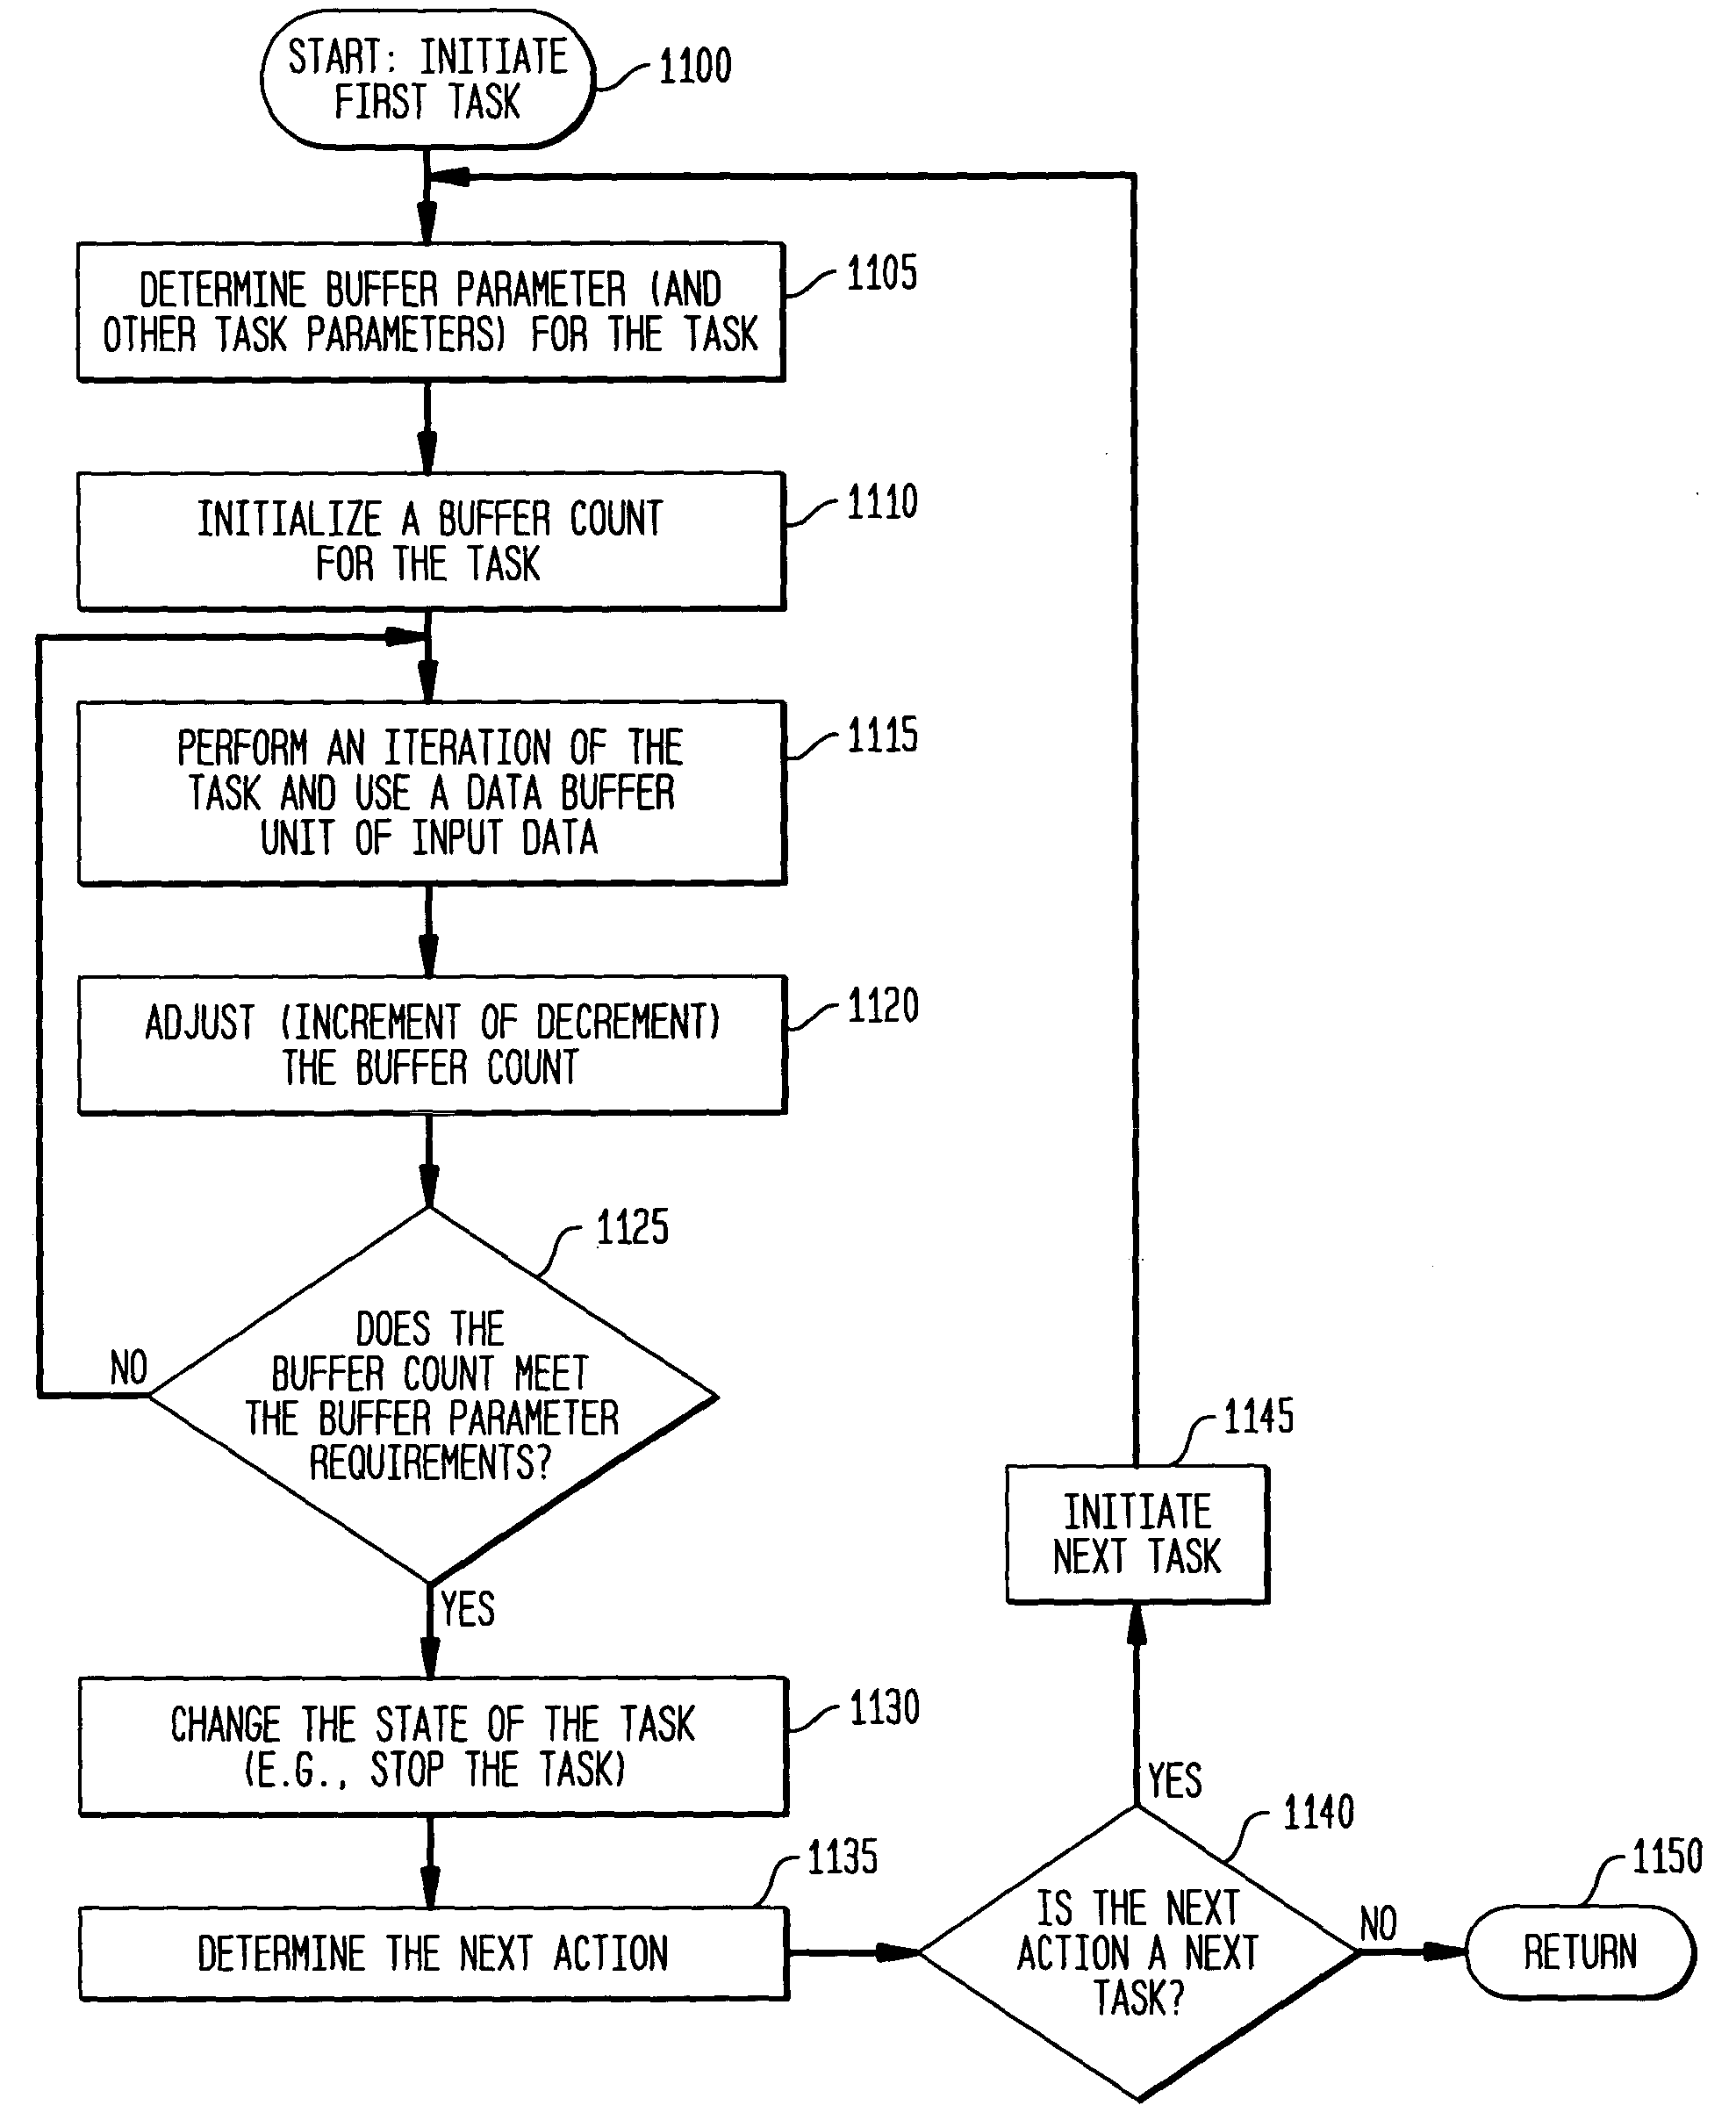 Data flow control for adaptive integrated circuitry